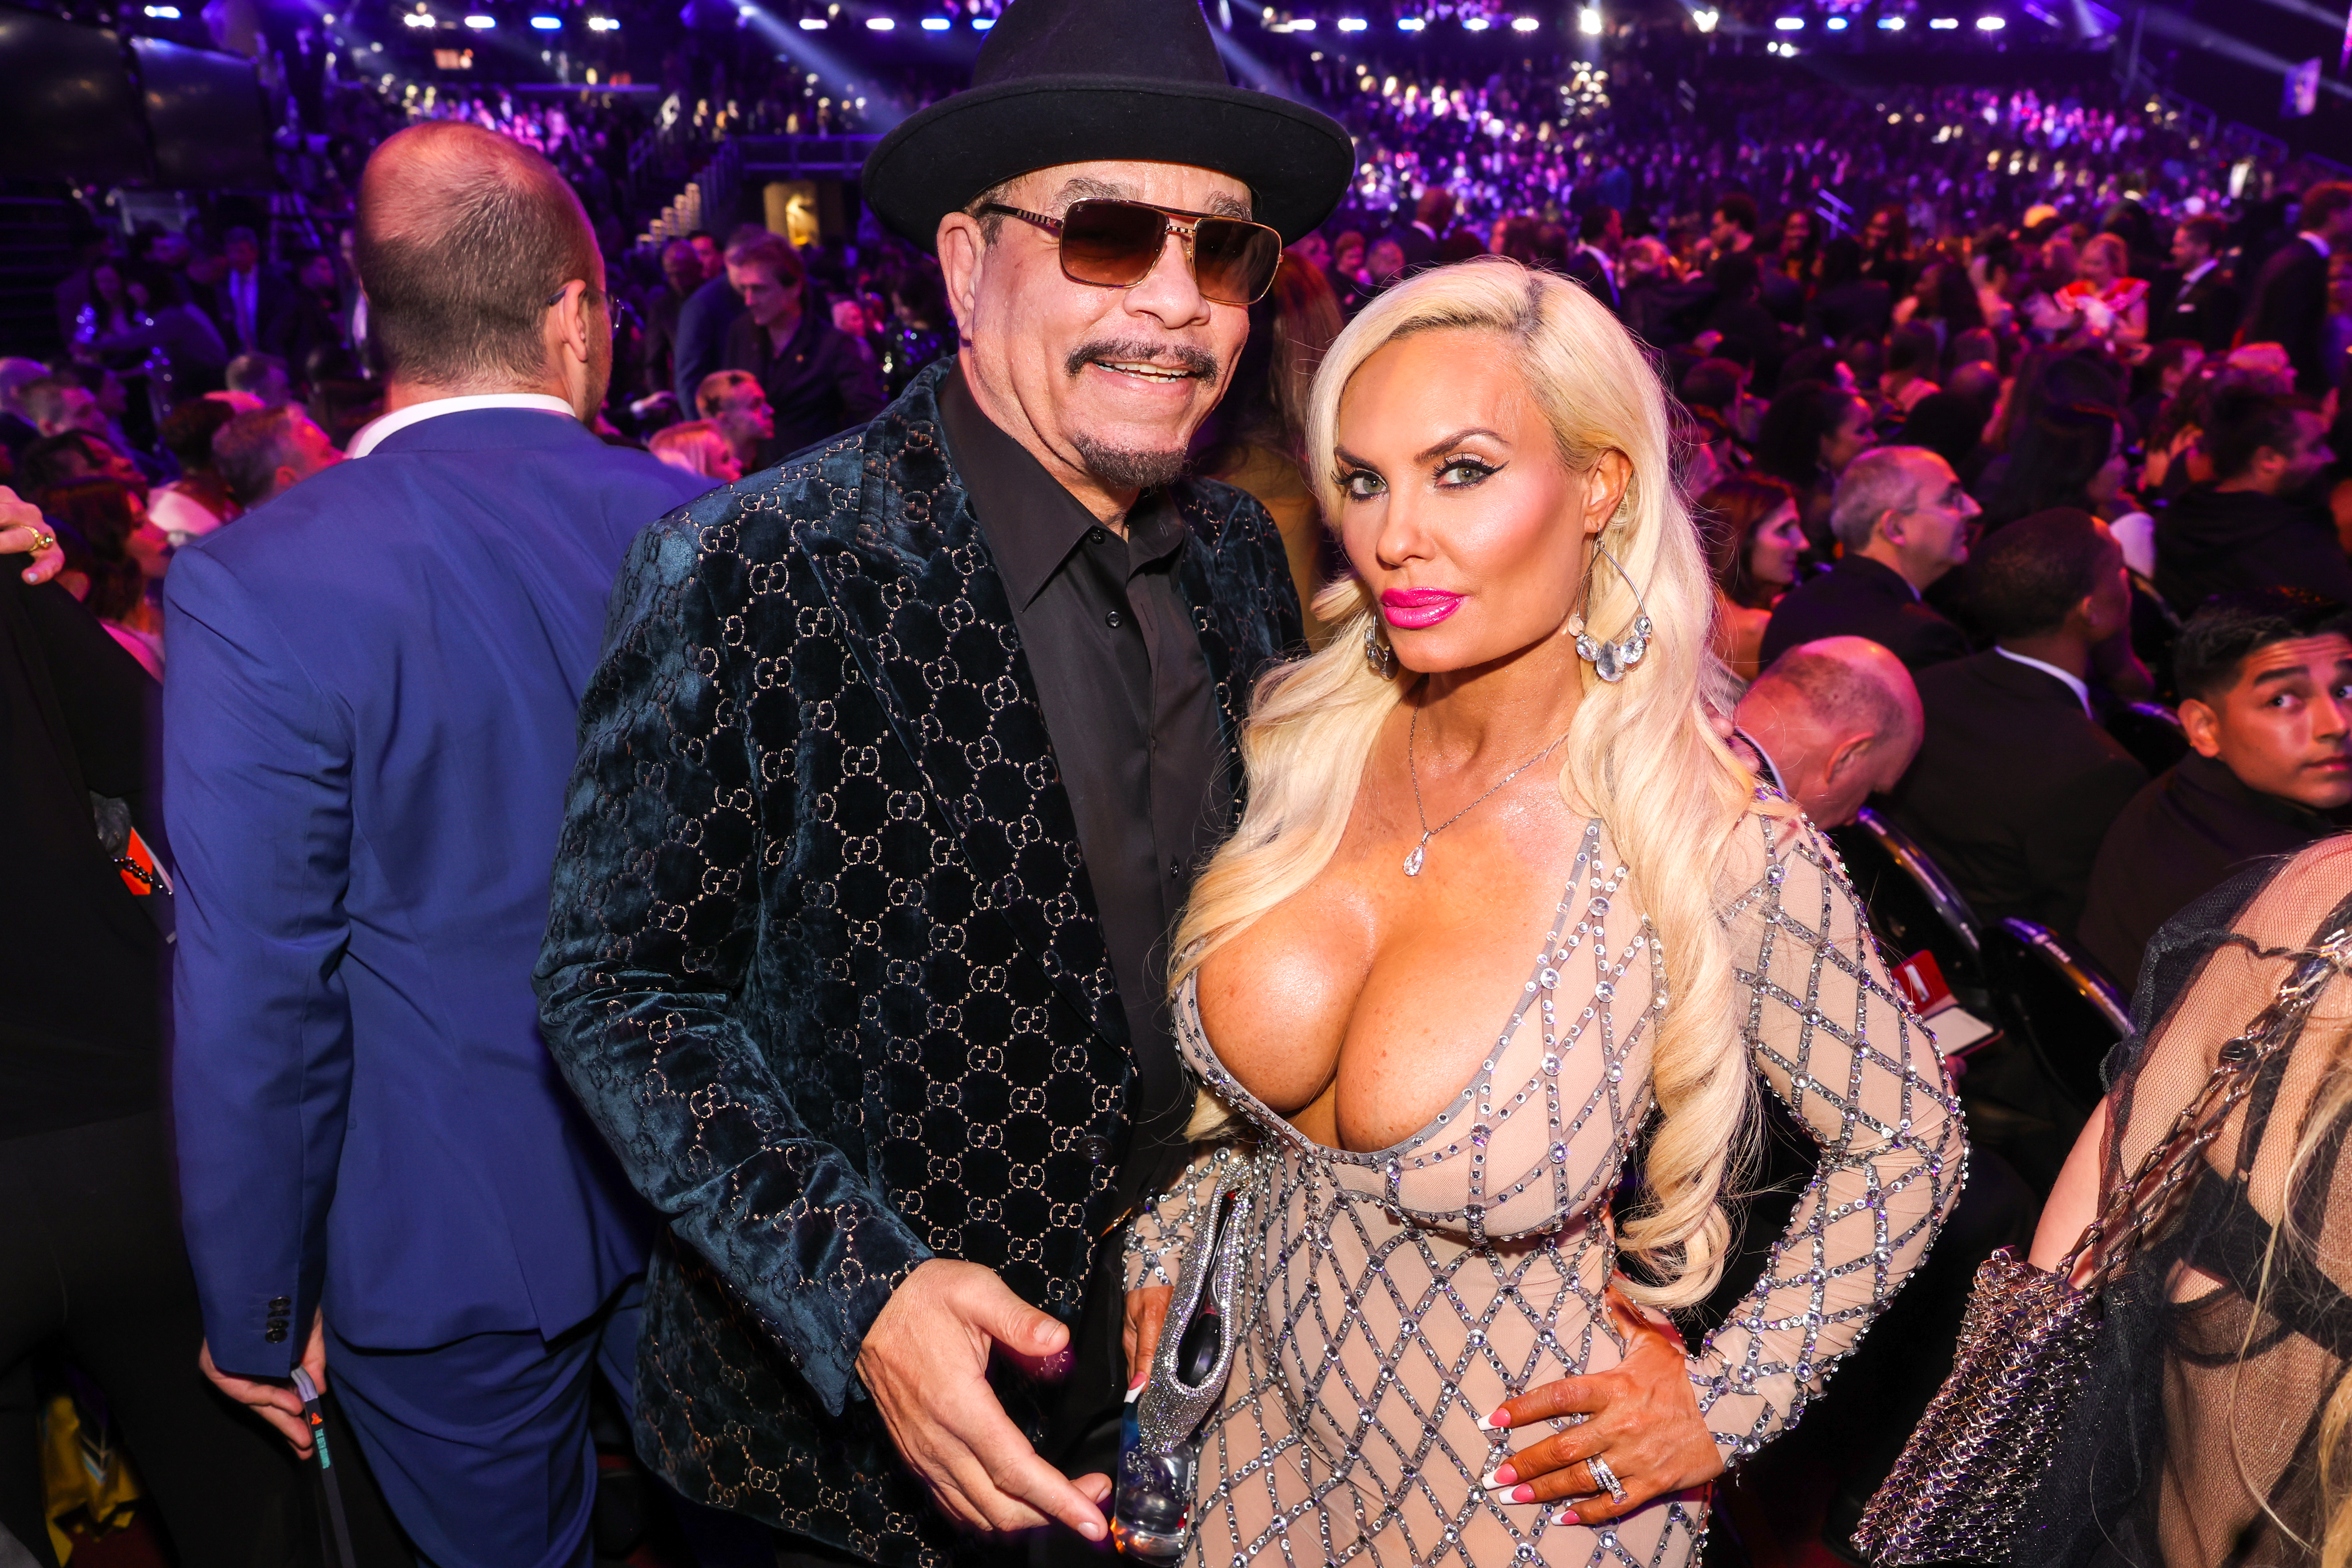 Coco ice t porn ❤️ Best adult photos at doai